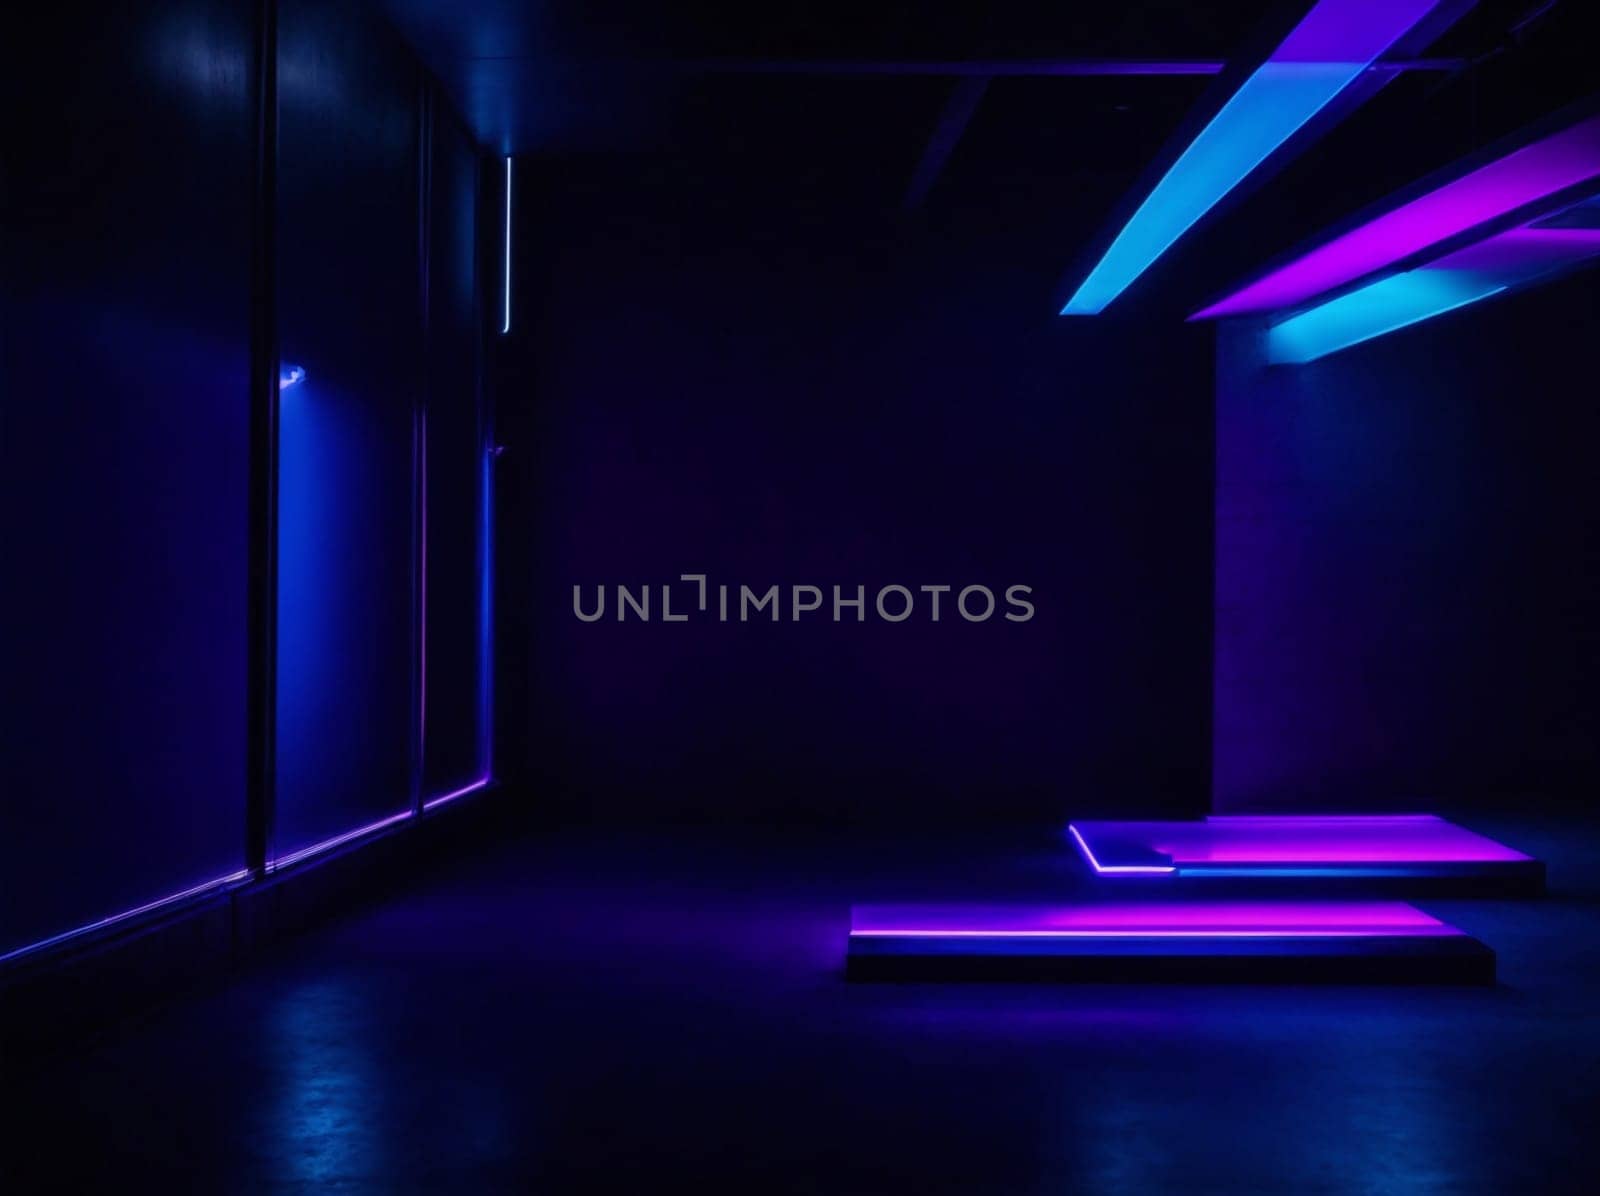 An atmospheric room softly lit by blue and purple hues, creating an intimate and mysterious ambiance.